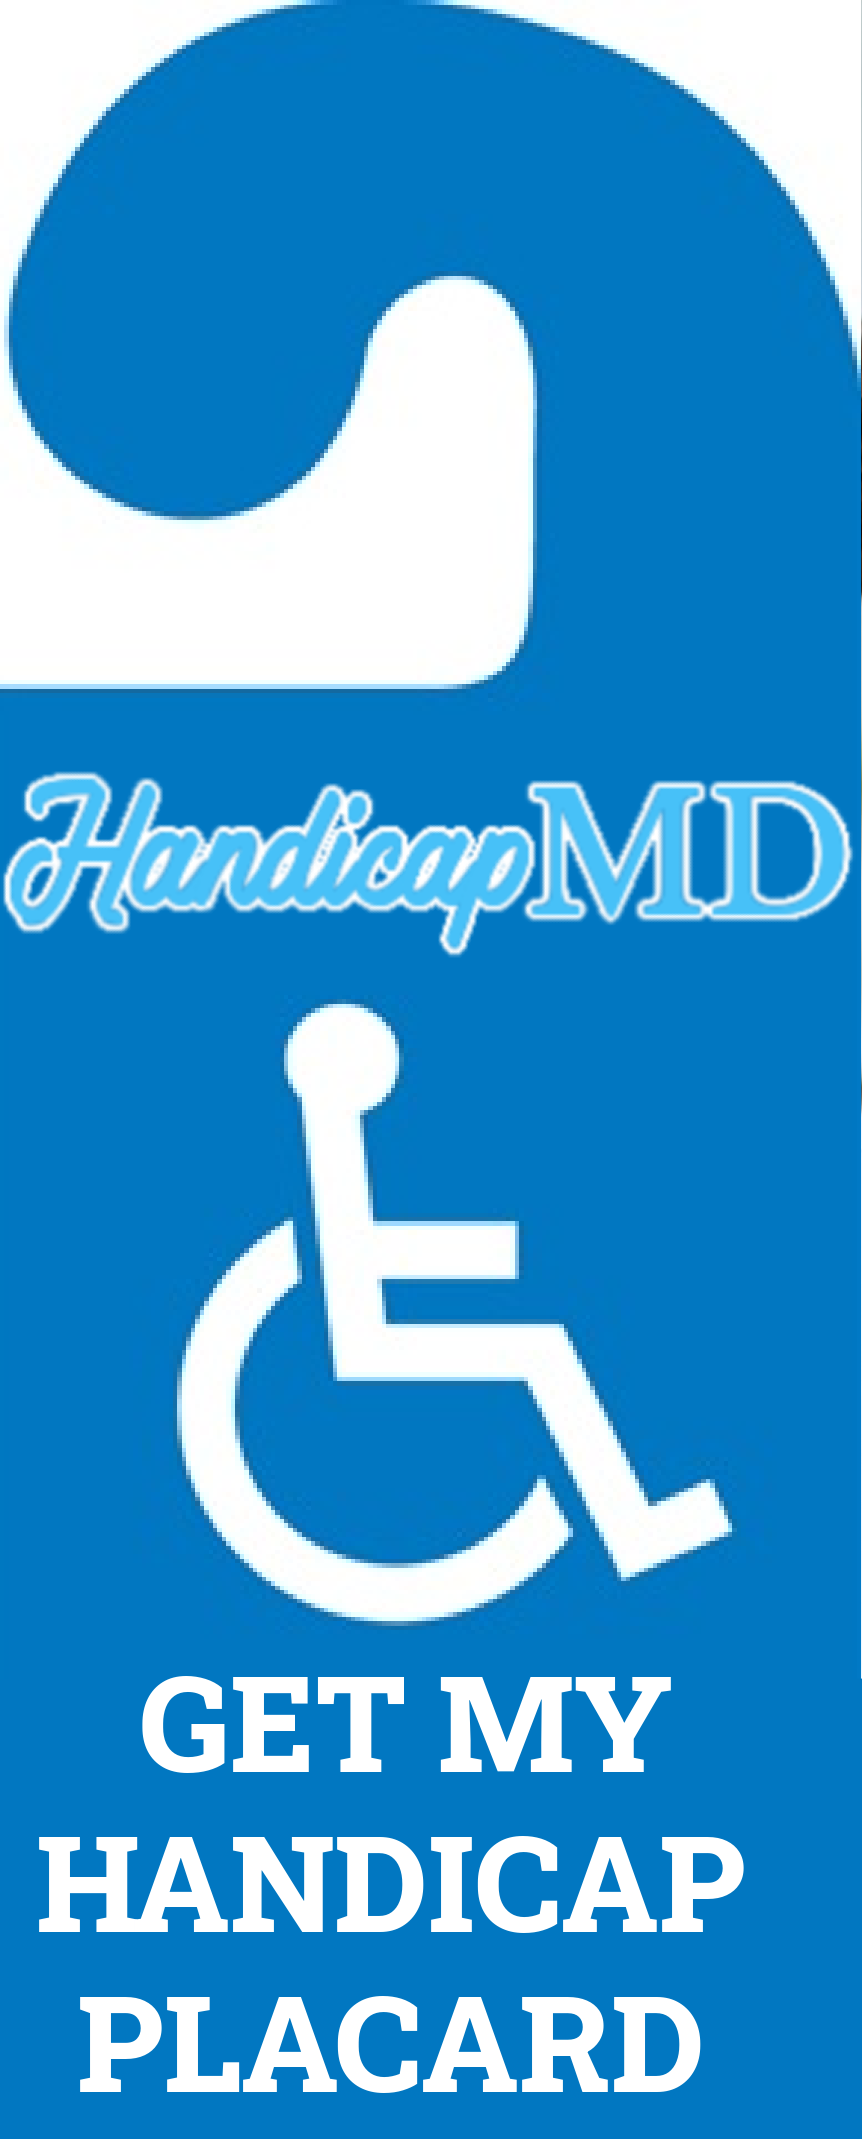 Tips for Displaying Your Handicap Placard Correctly in Florida